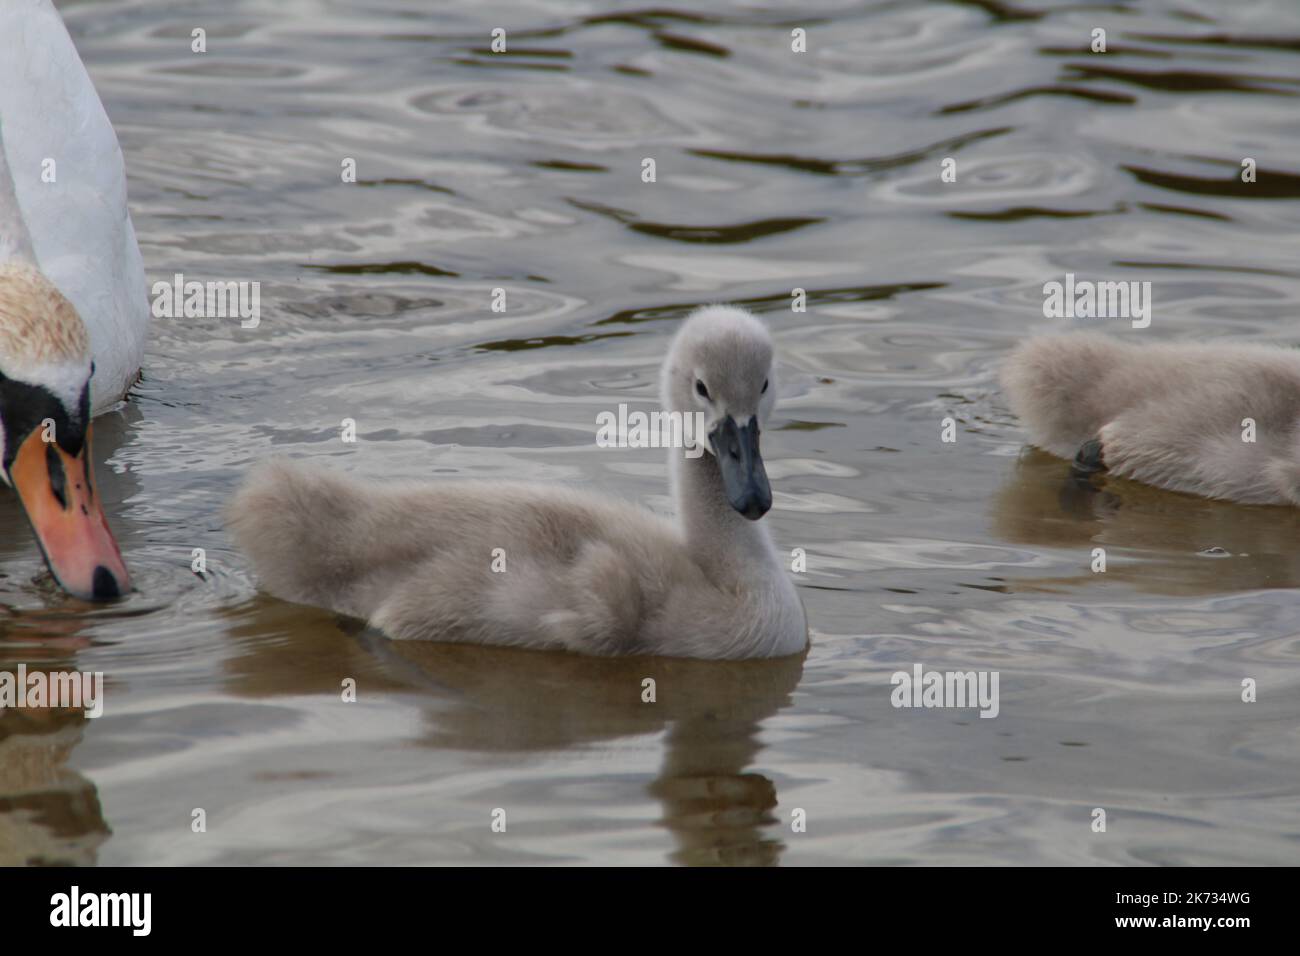 a family of white swans went for a walk on the beach near the lake Stock Photo